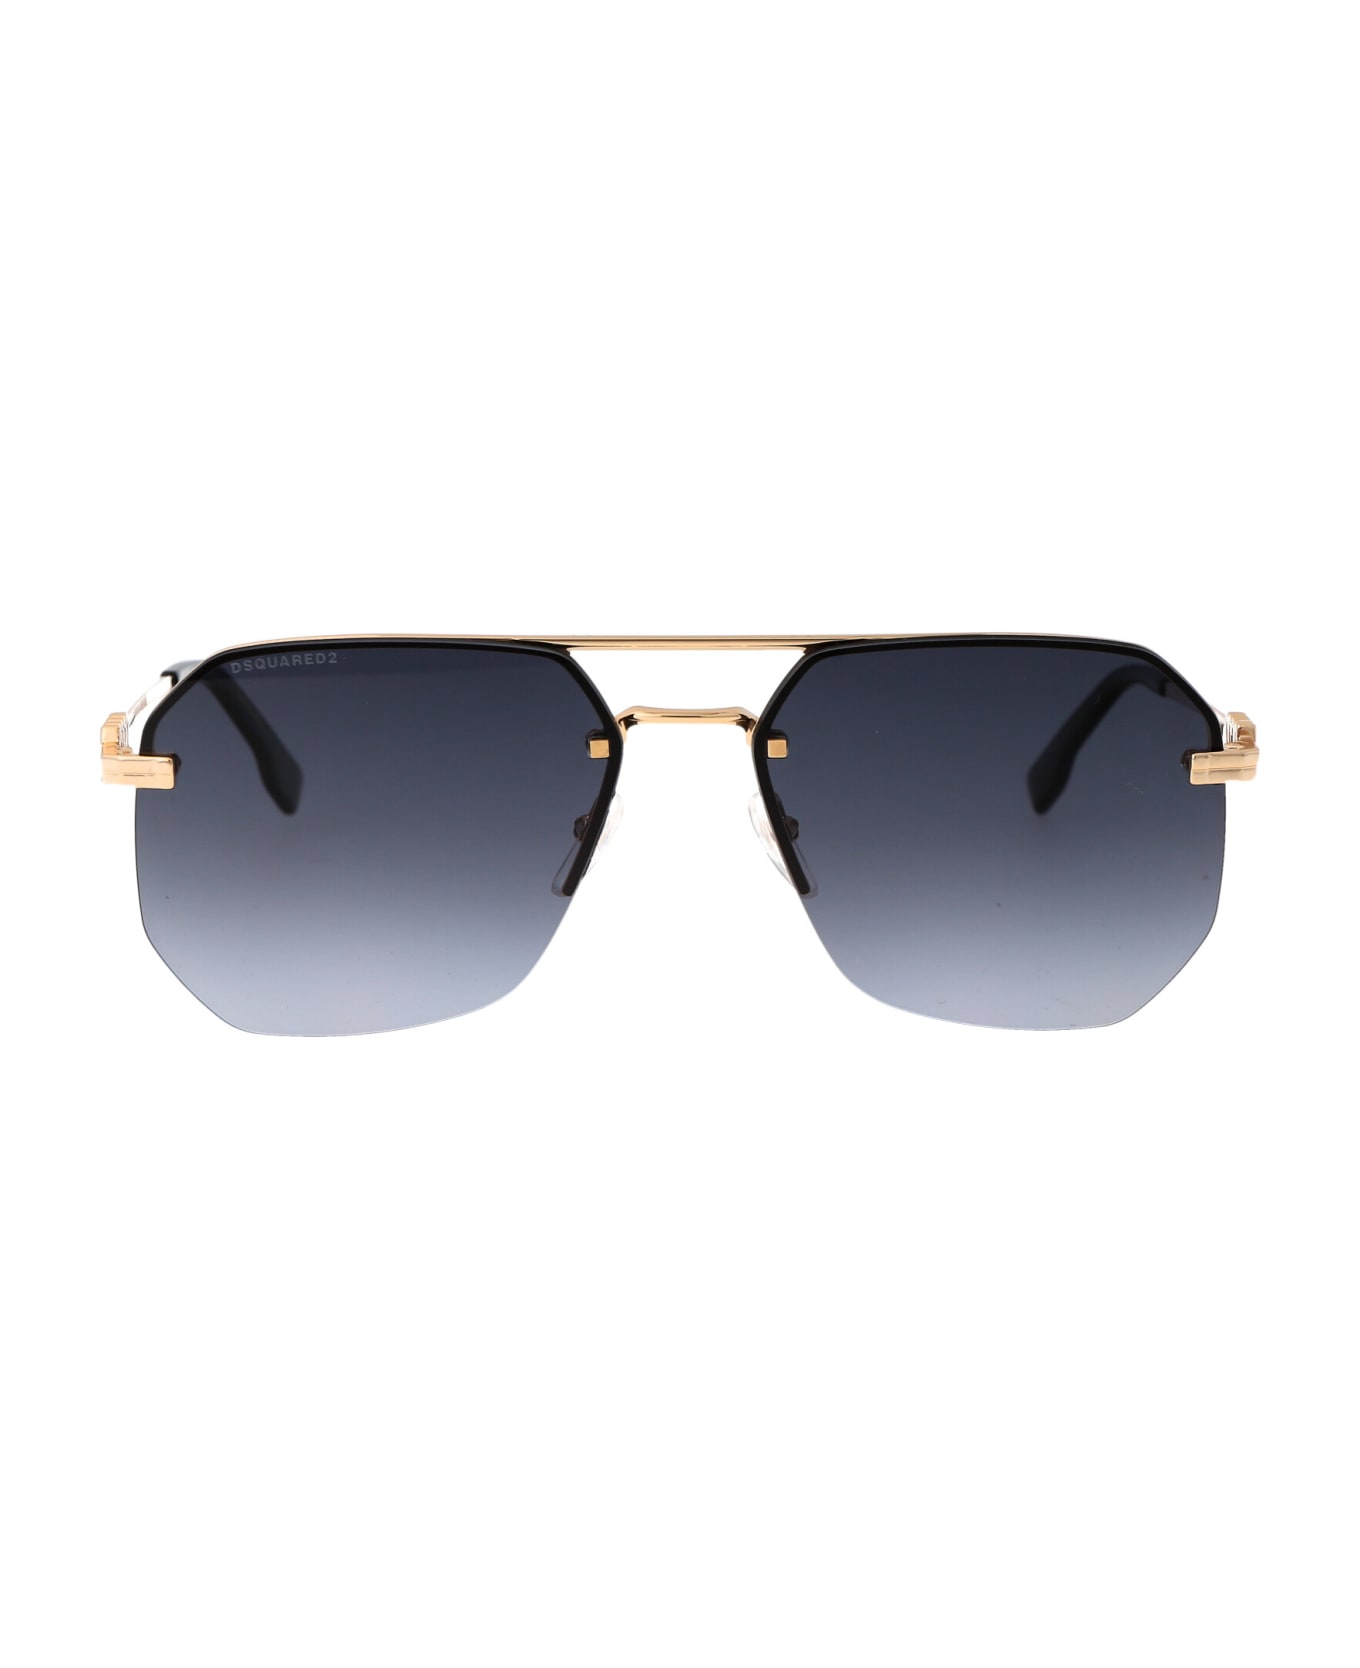 Dsquared2 Eyewear D2 0103/s Sunglasses - HAWKERS Polarized Carbon Black Emerald ONE Sunglasses for Men and Women UV400